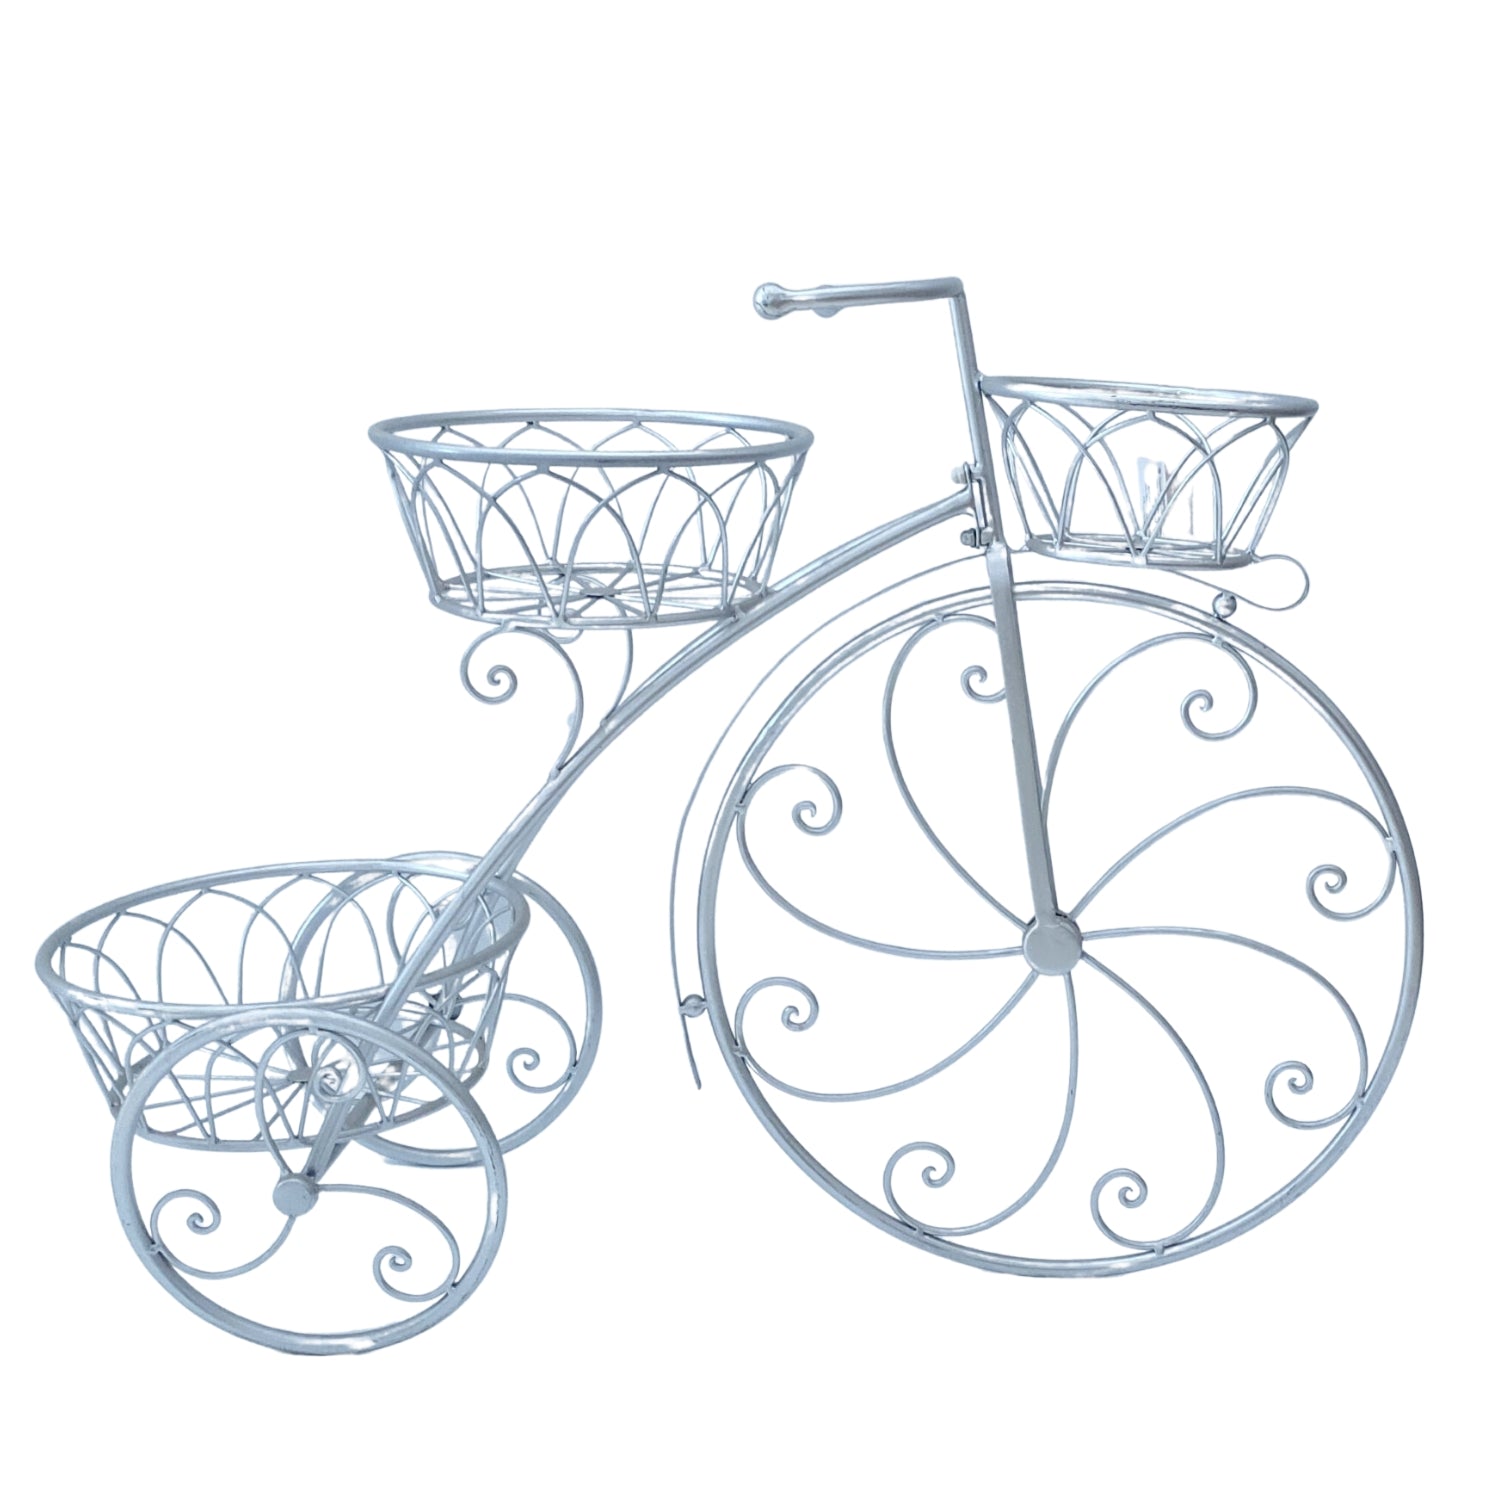 The Home Garden Bicycle Planter - Silver 1 Shaws Department Stores